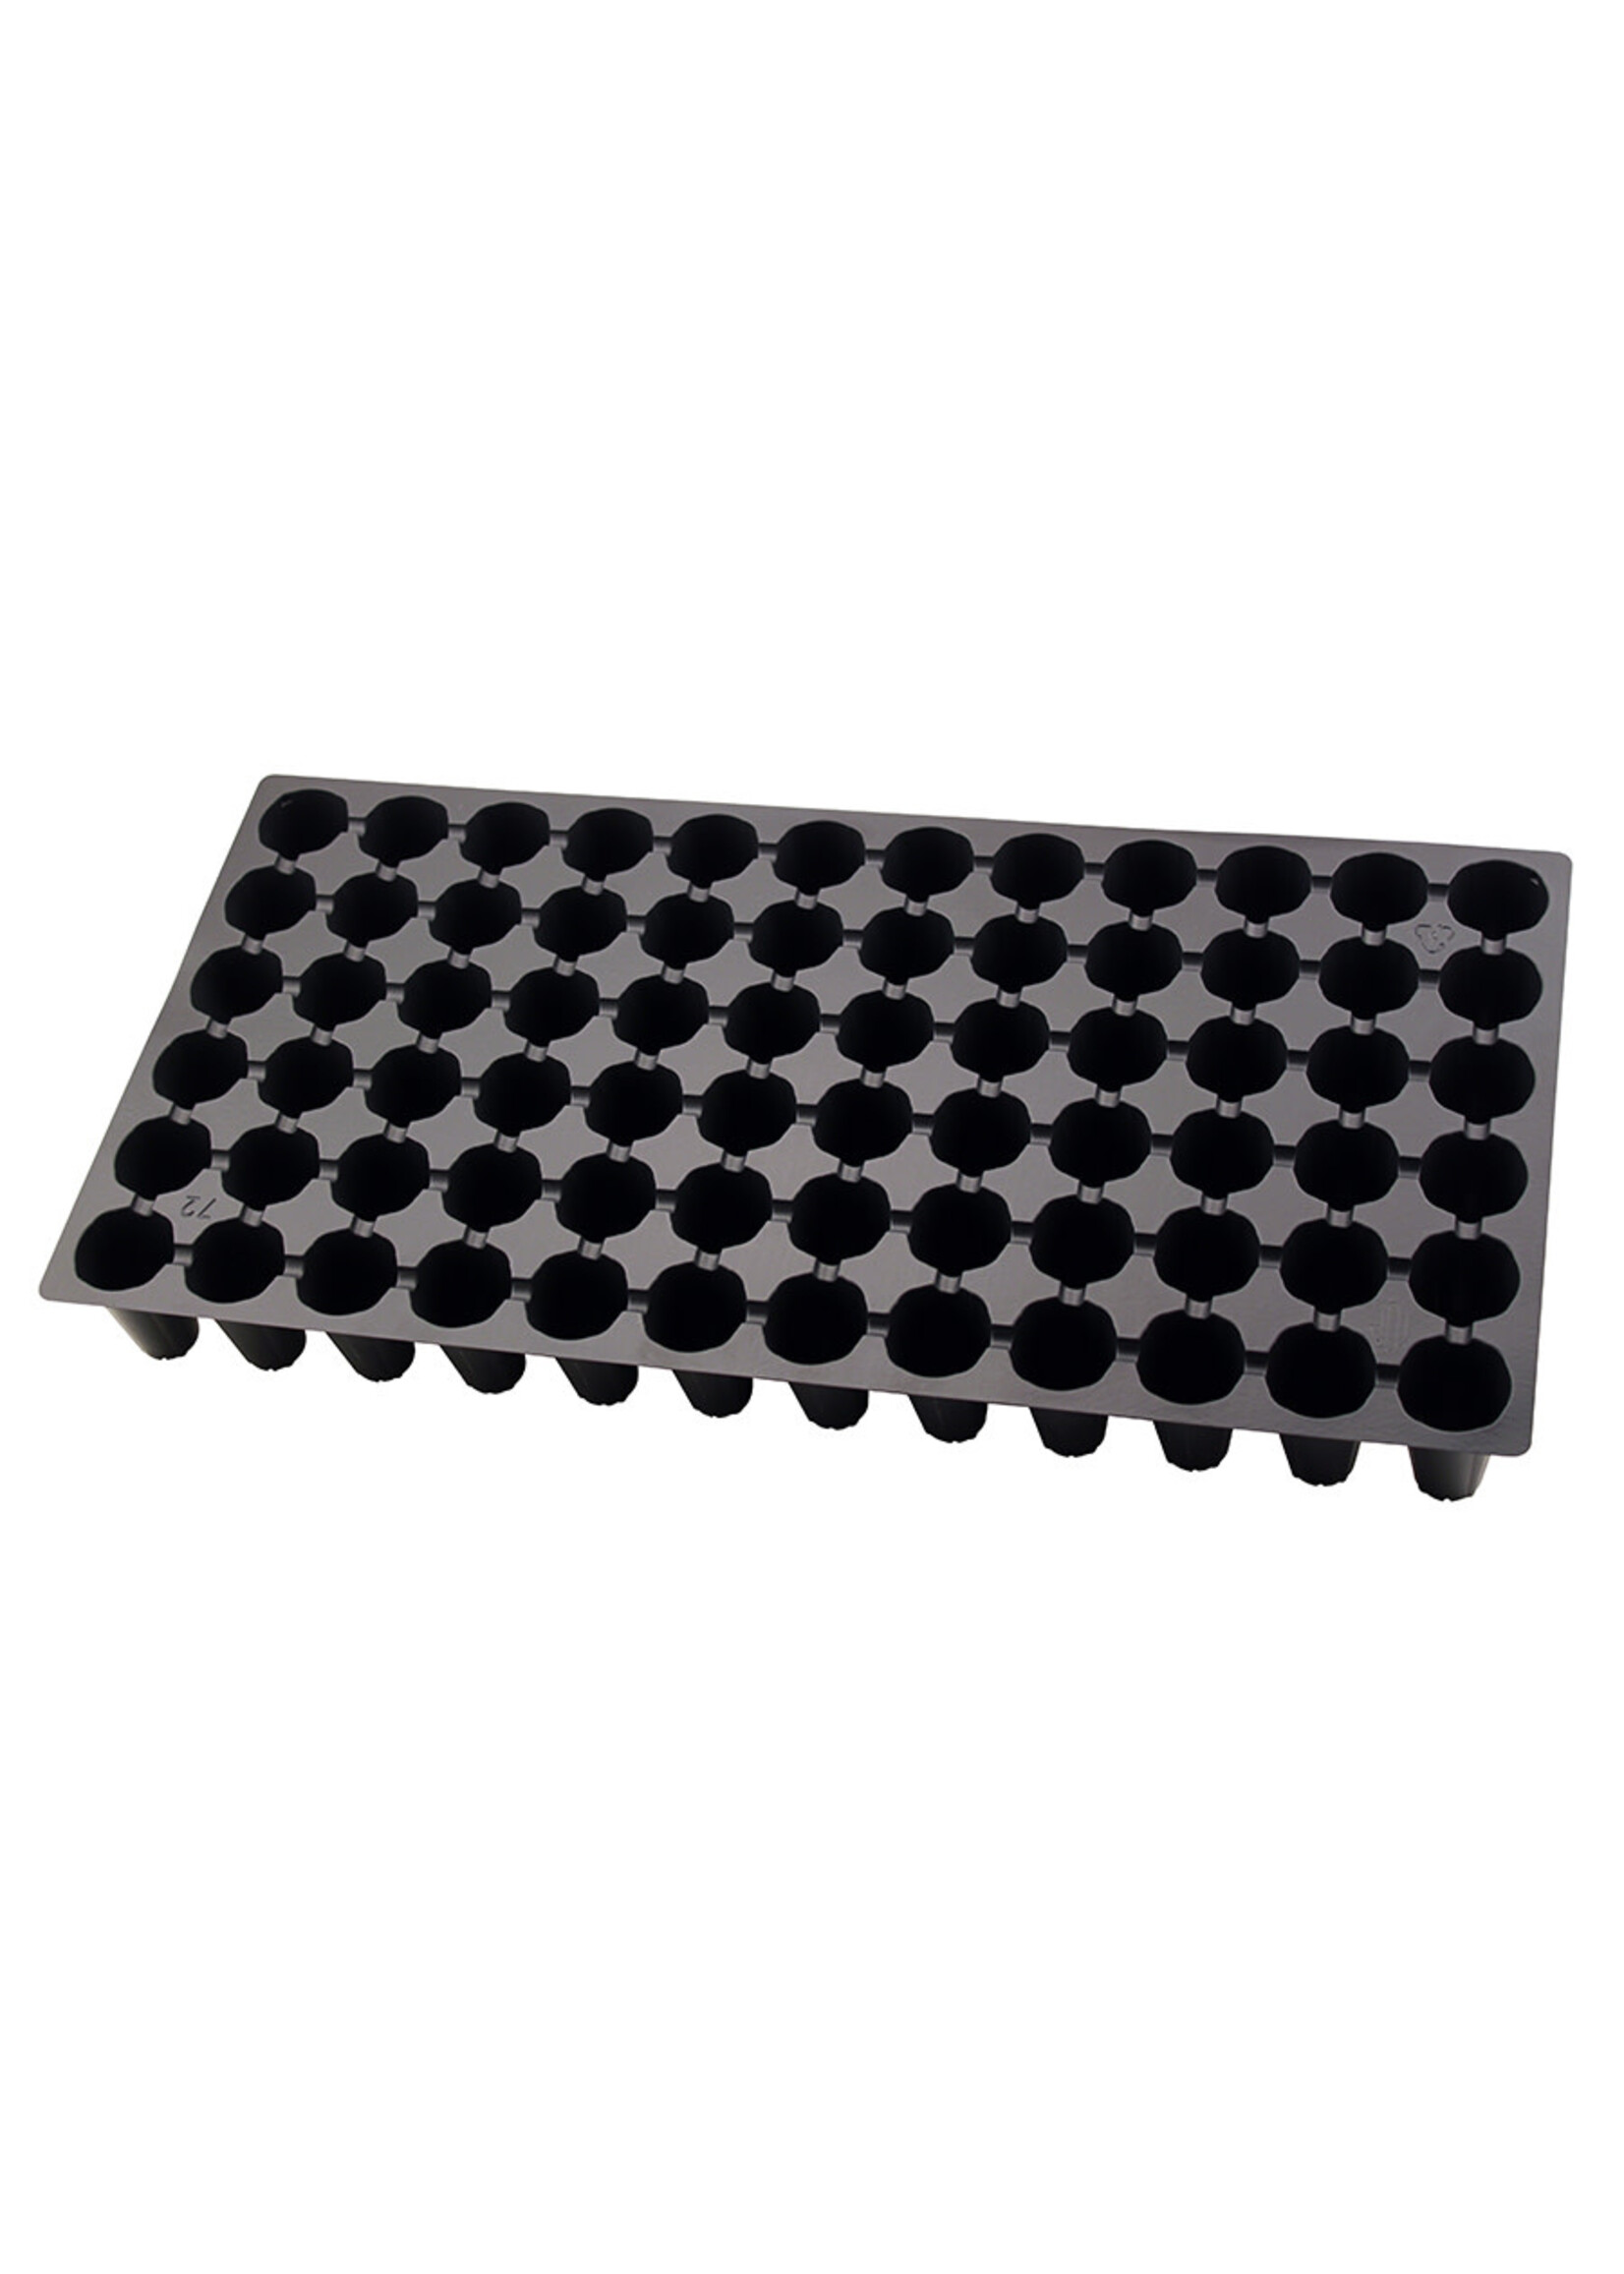 Super Sprouter Super Sprouter 72 Cell Germination Insert Tray - Round Holes (100/Cs)